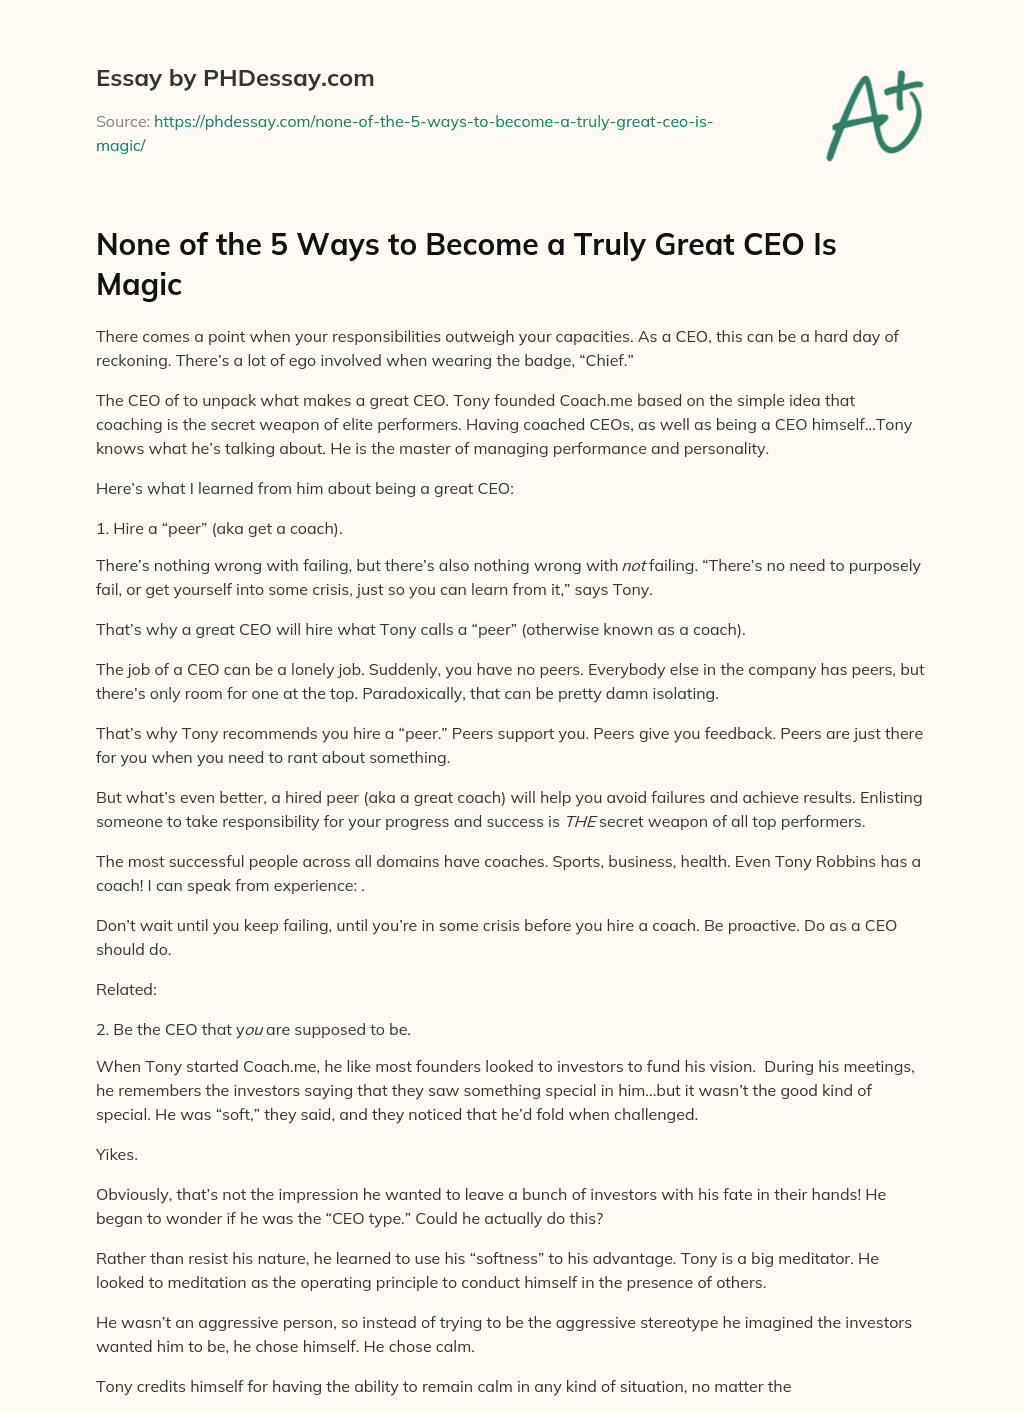 None of the 5 Ways to Become a Truly Great CEO Is Magic essay